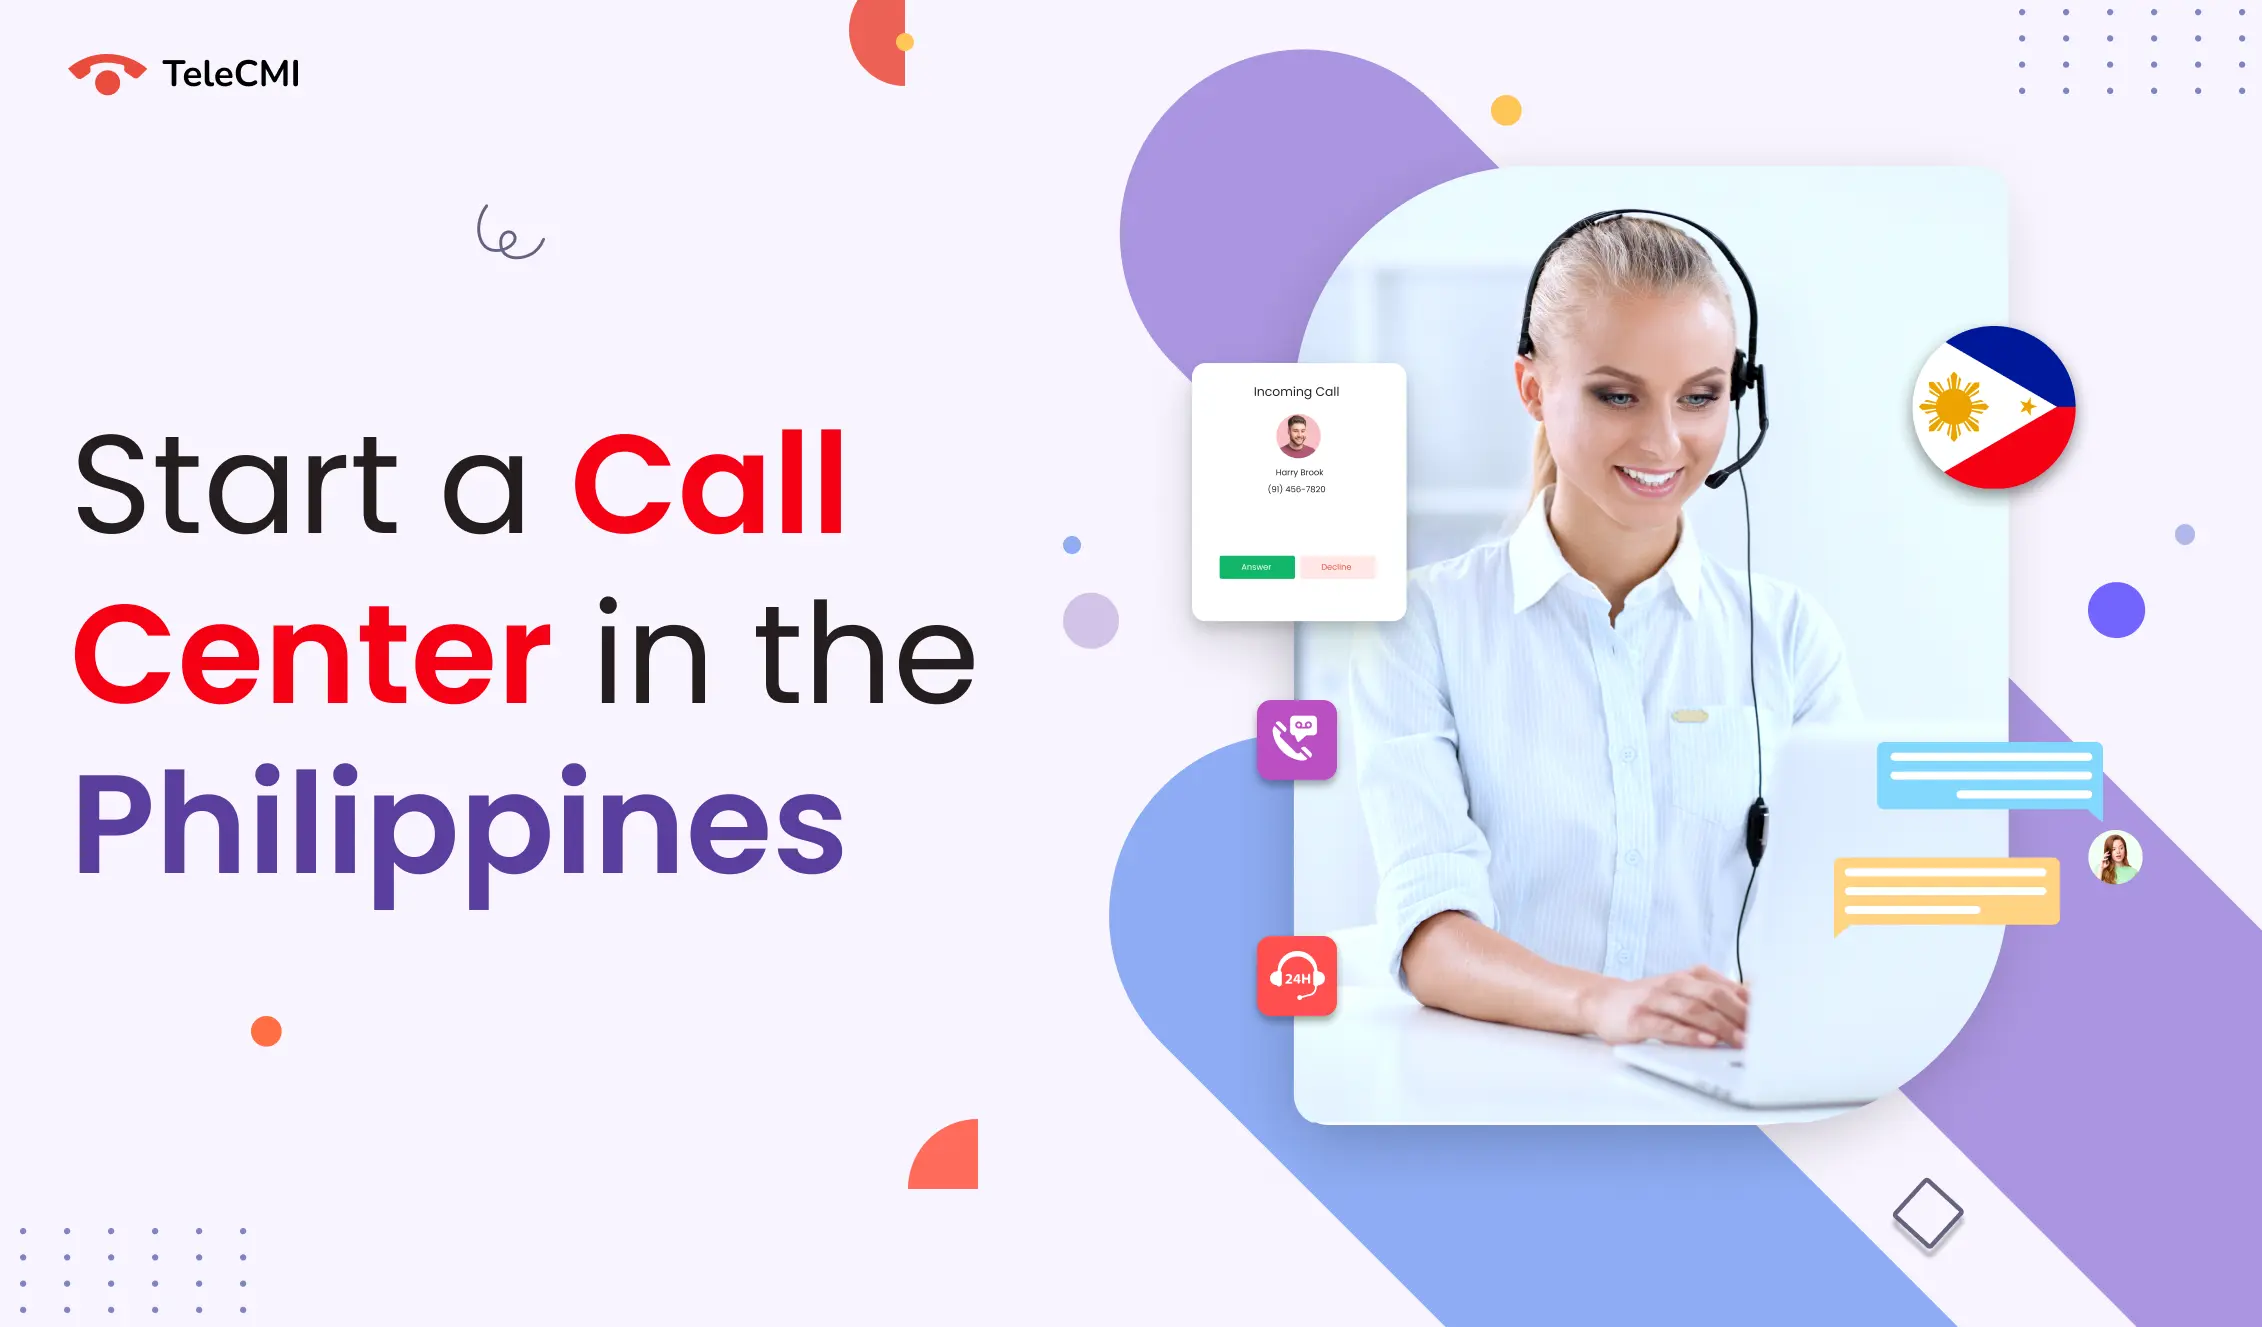 Guide to Starting a Call Center in the Philippines